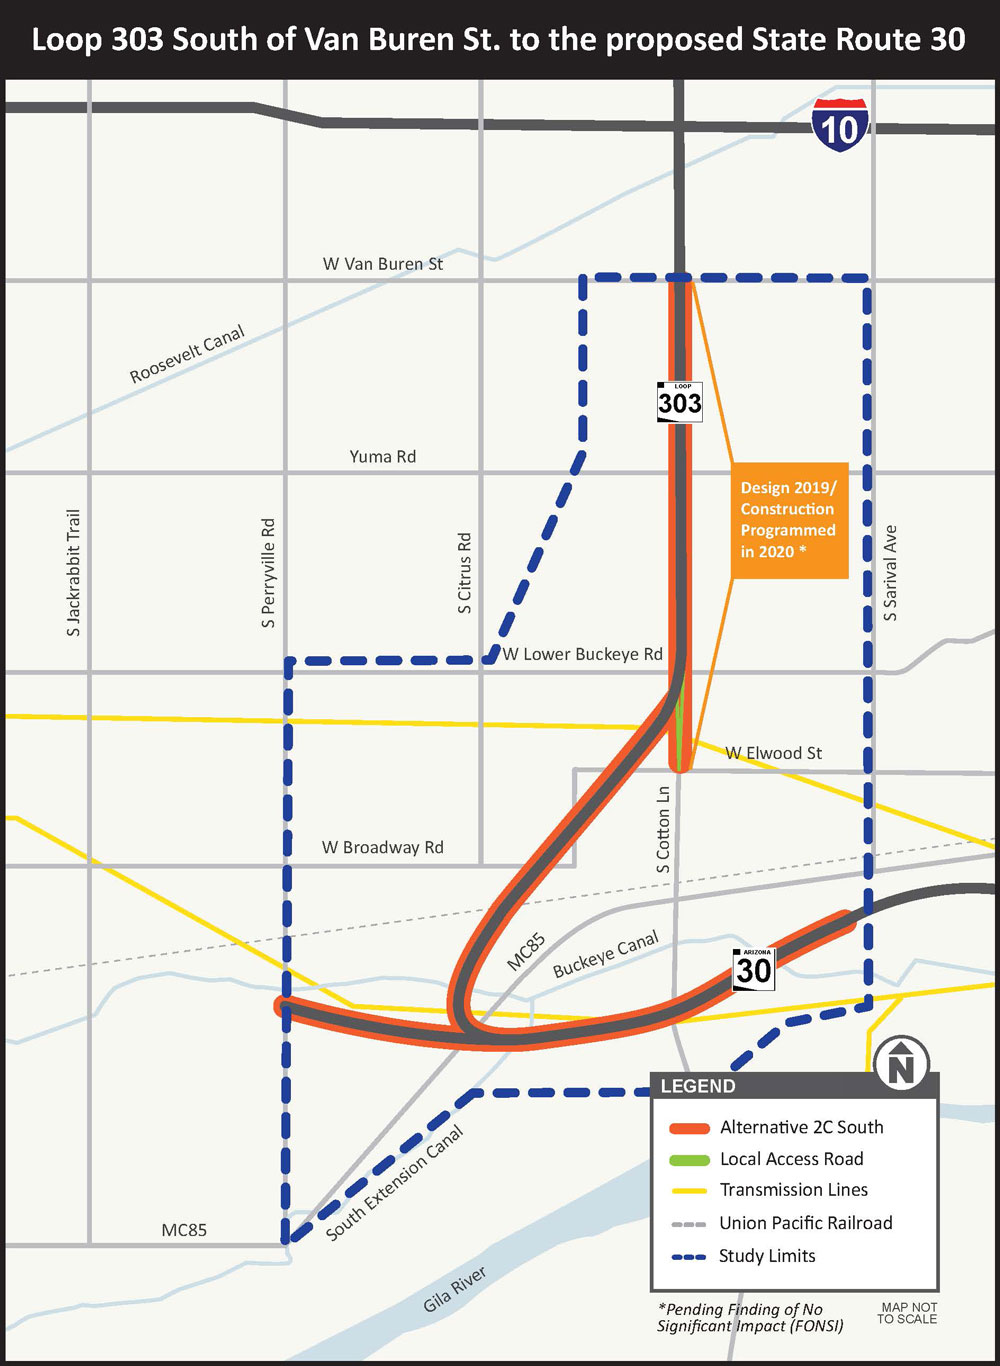 Loop 303 South of Van Buren St. to the proposed State Route 30